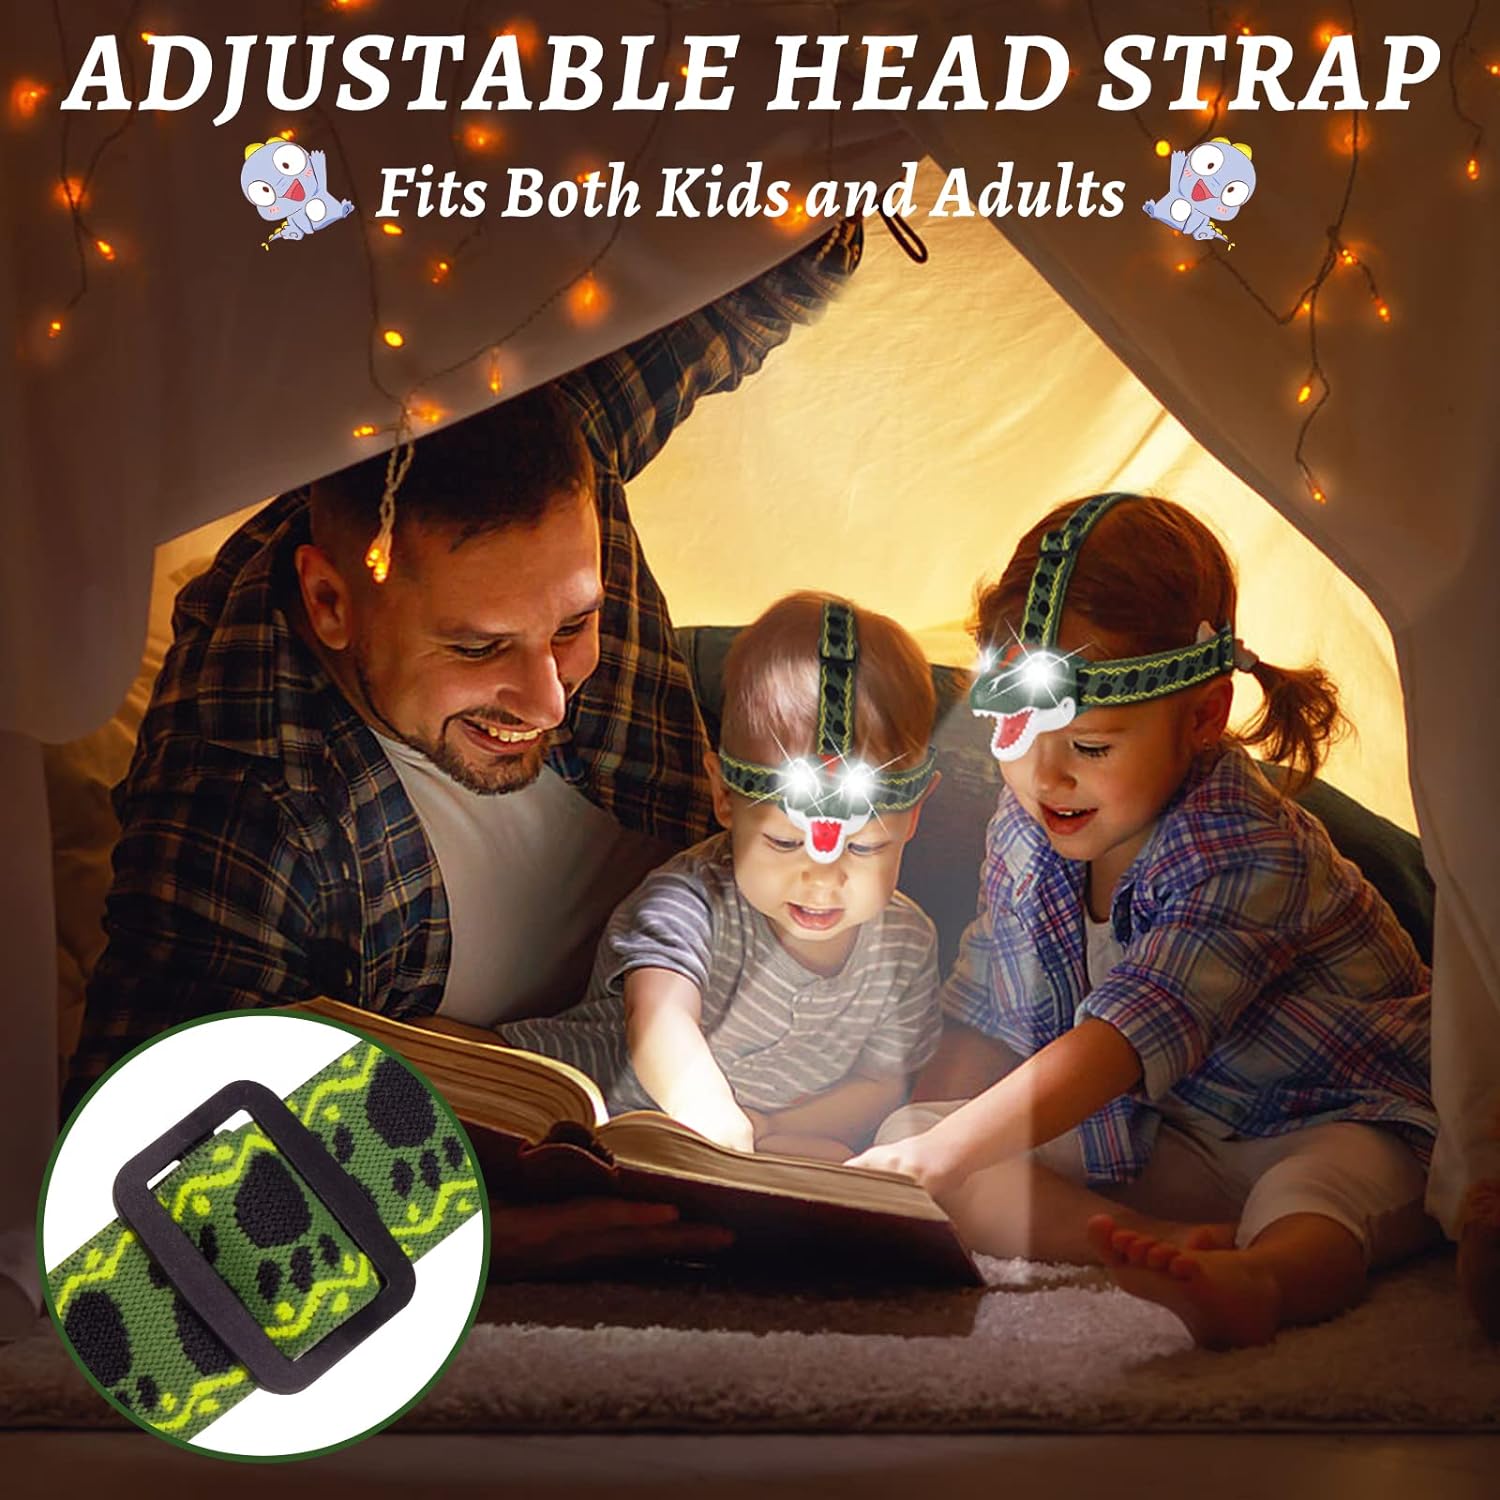 DX DA XIN Dinosaur LED Headlamp T-Rex for Kids Flashlights Camping Gear - Dinosaur Toys for Boys Girls Toddlers Outdoor Toys for Kids Birthday Christmas Gifts Stocking Stuffers